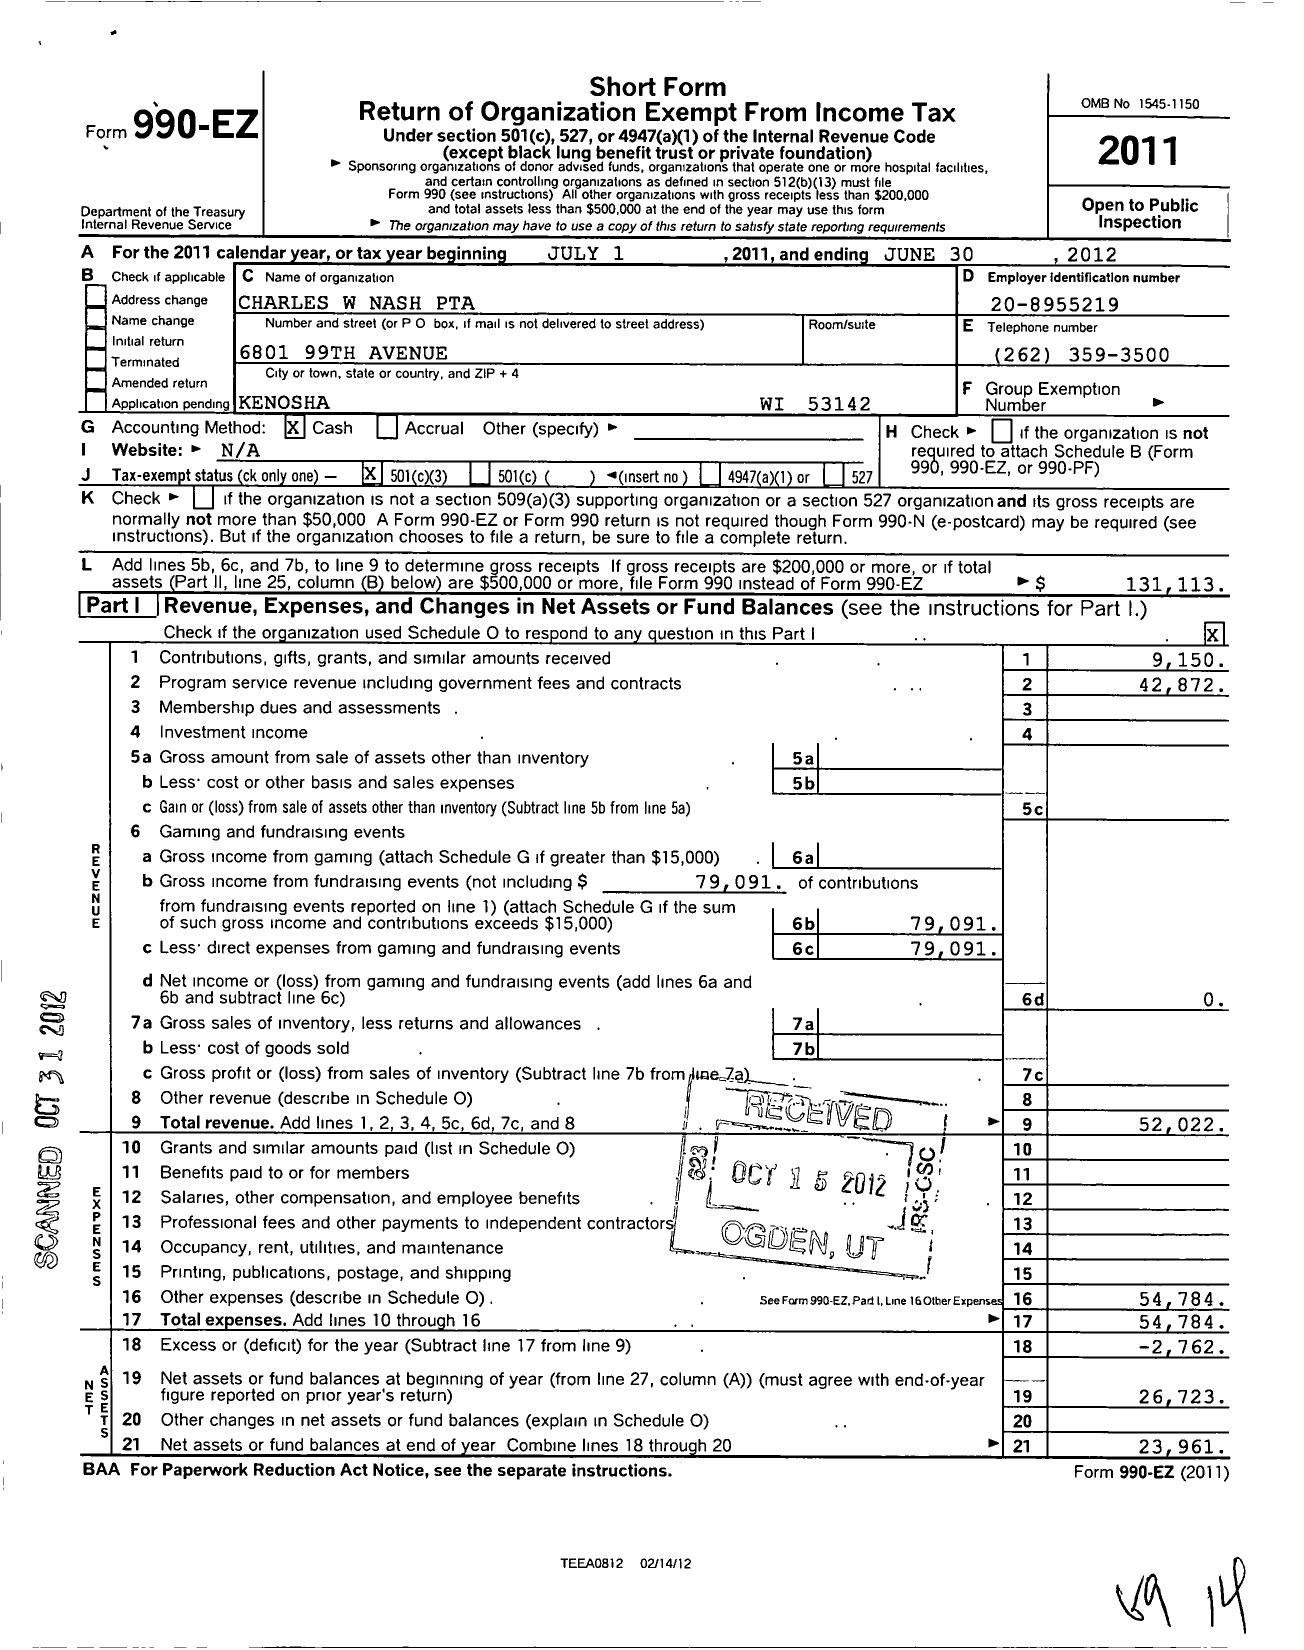 Image of first page of 2011 Form 990EZ for PTA Wisconsin Congress / Charles W Nash PTA